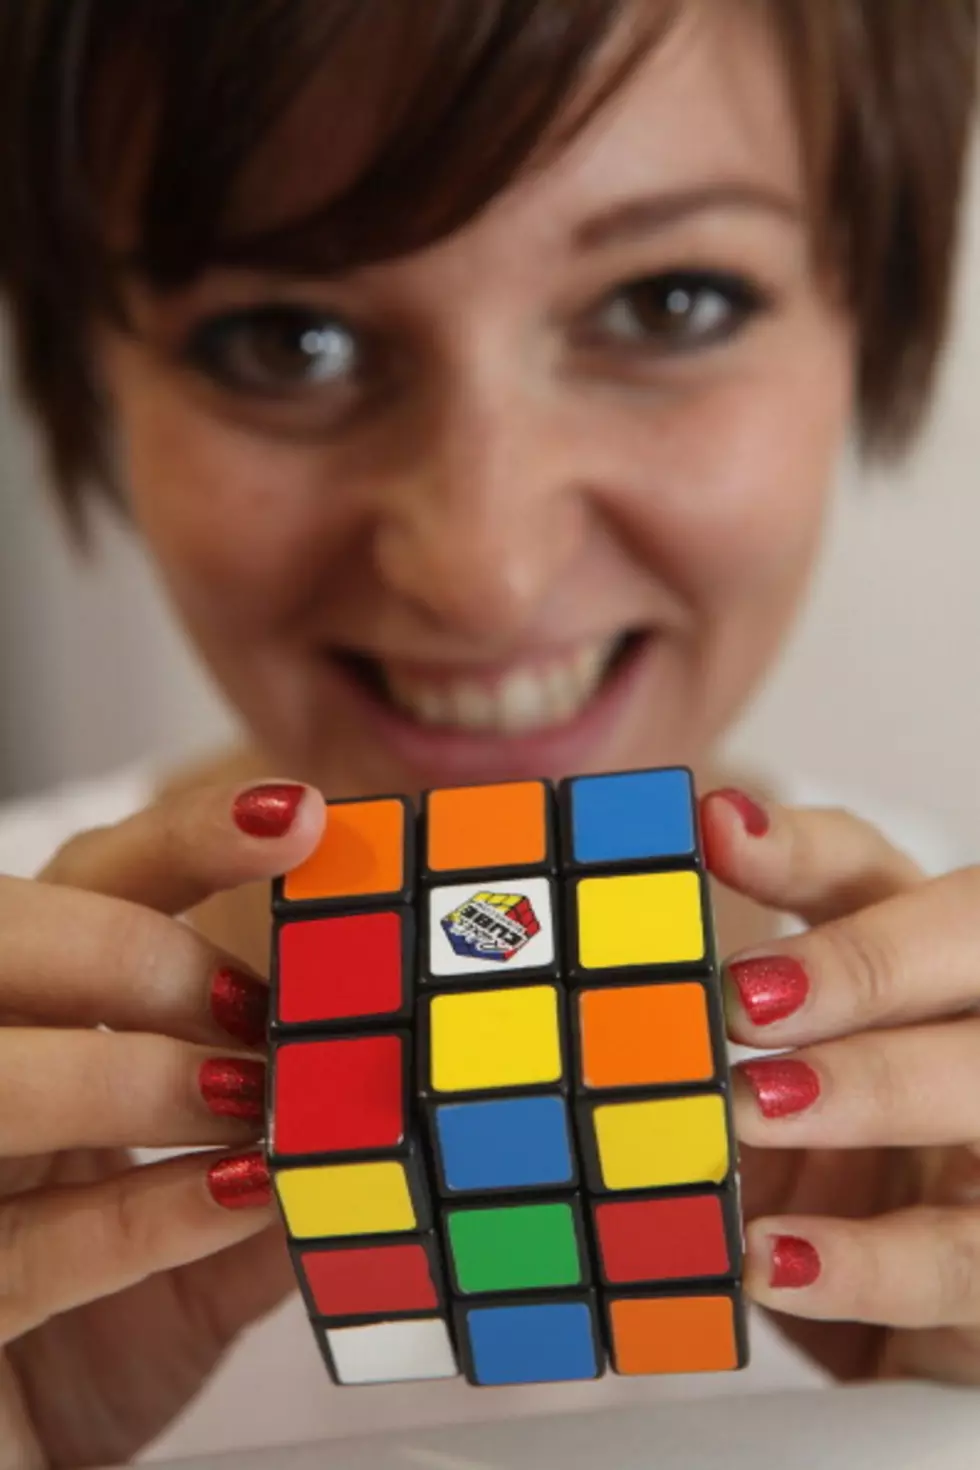 Awesome Juggler Solves Rubik’s Cube In Under A Minute